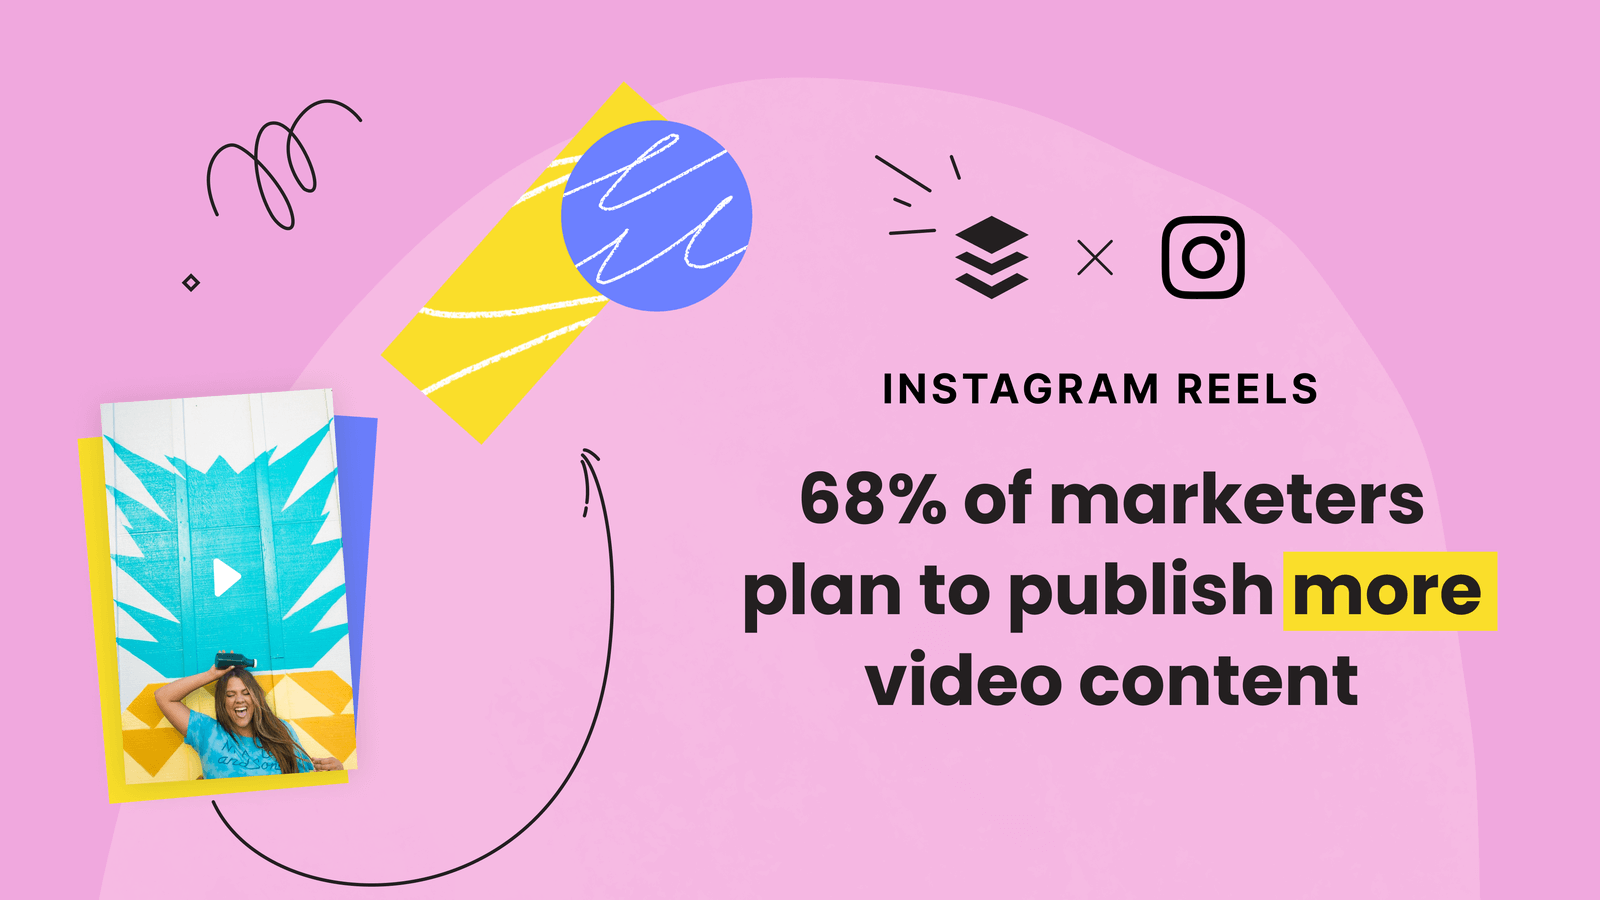 68% of marketers plan to post more video content on Instagram